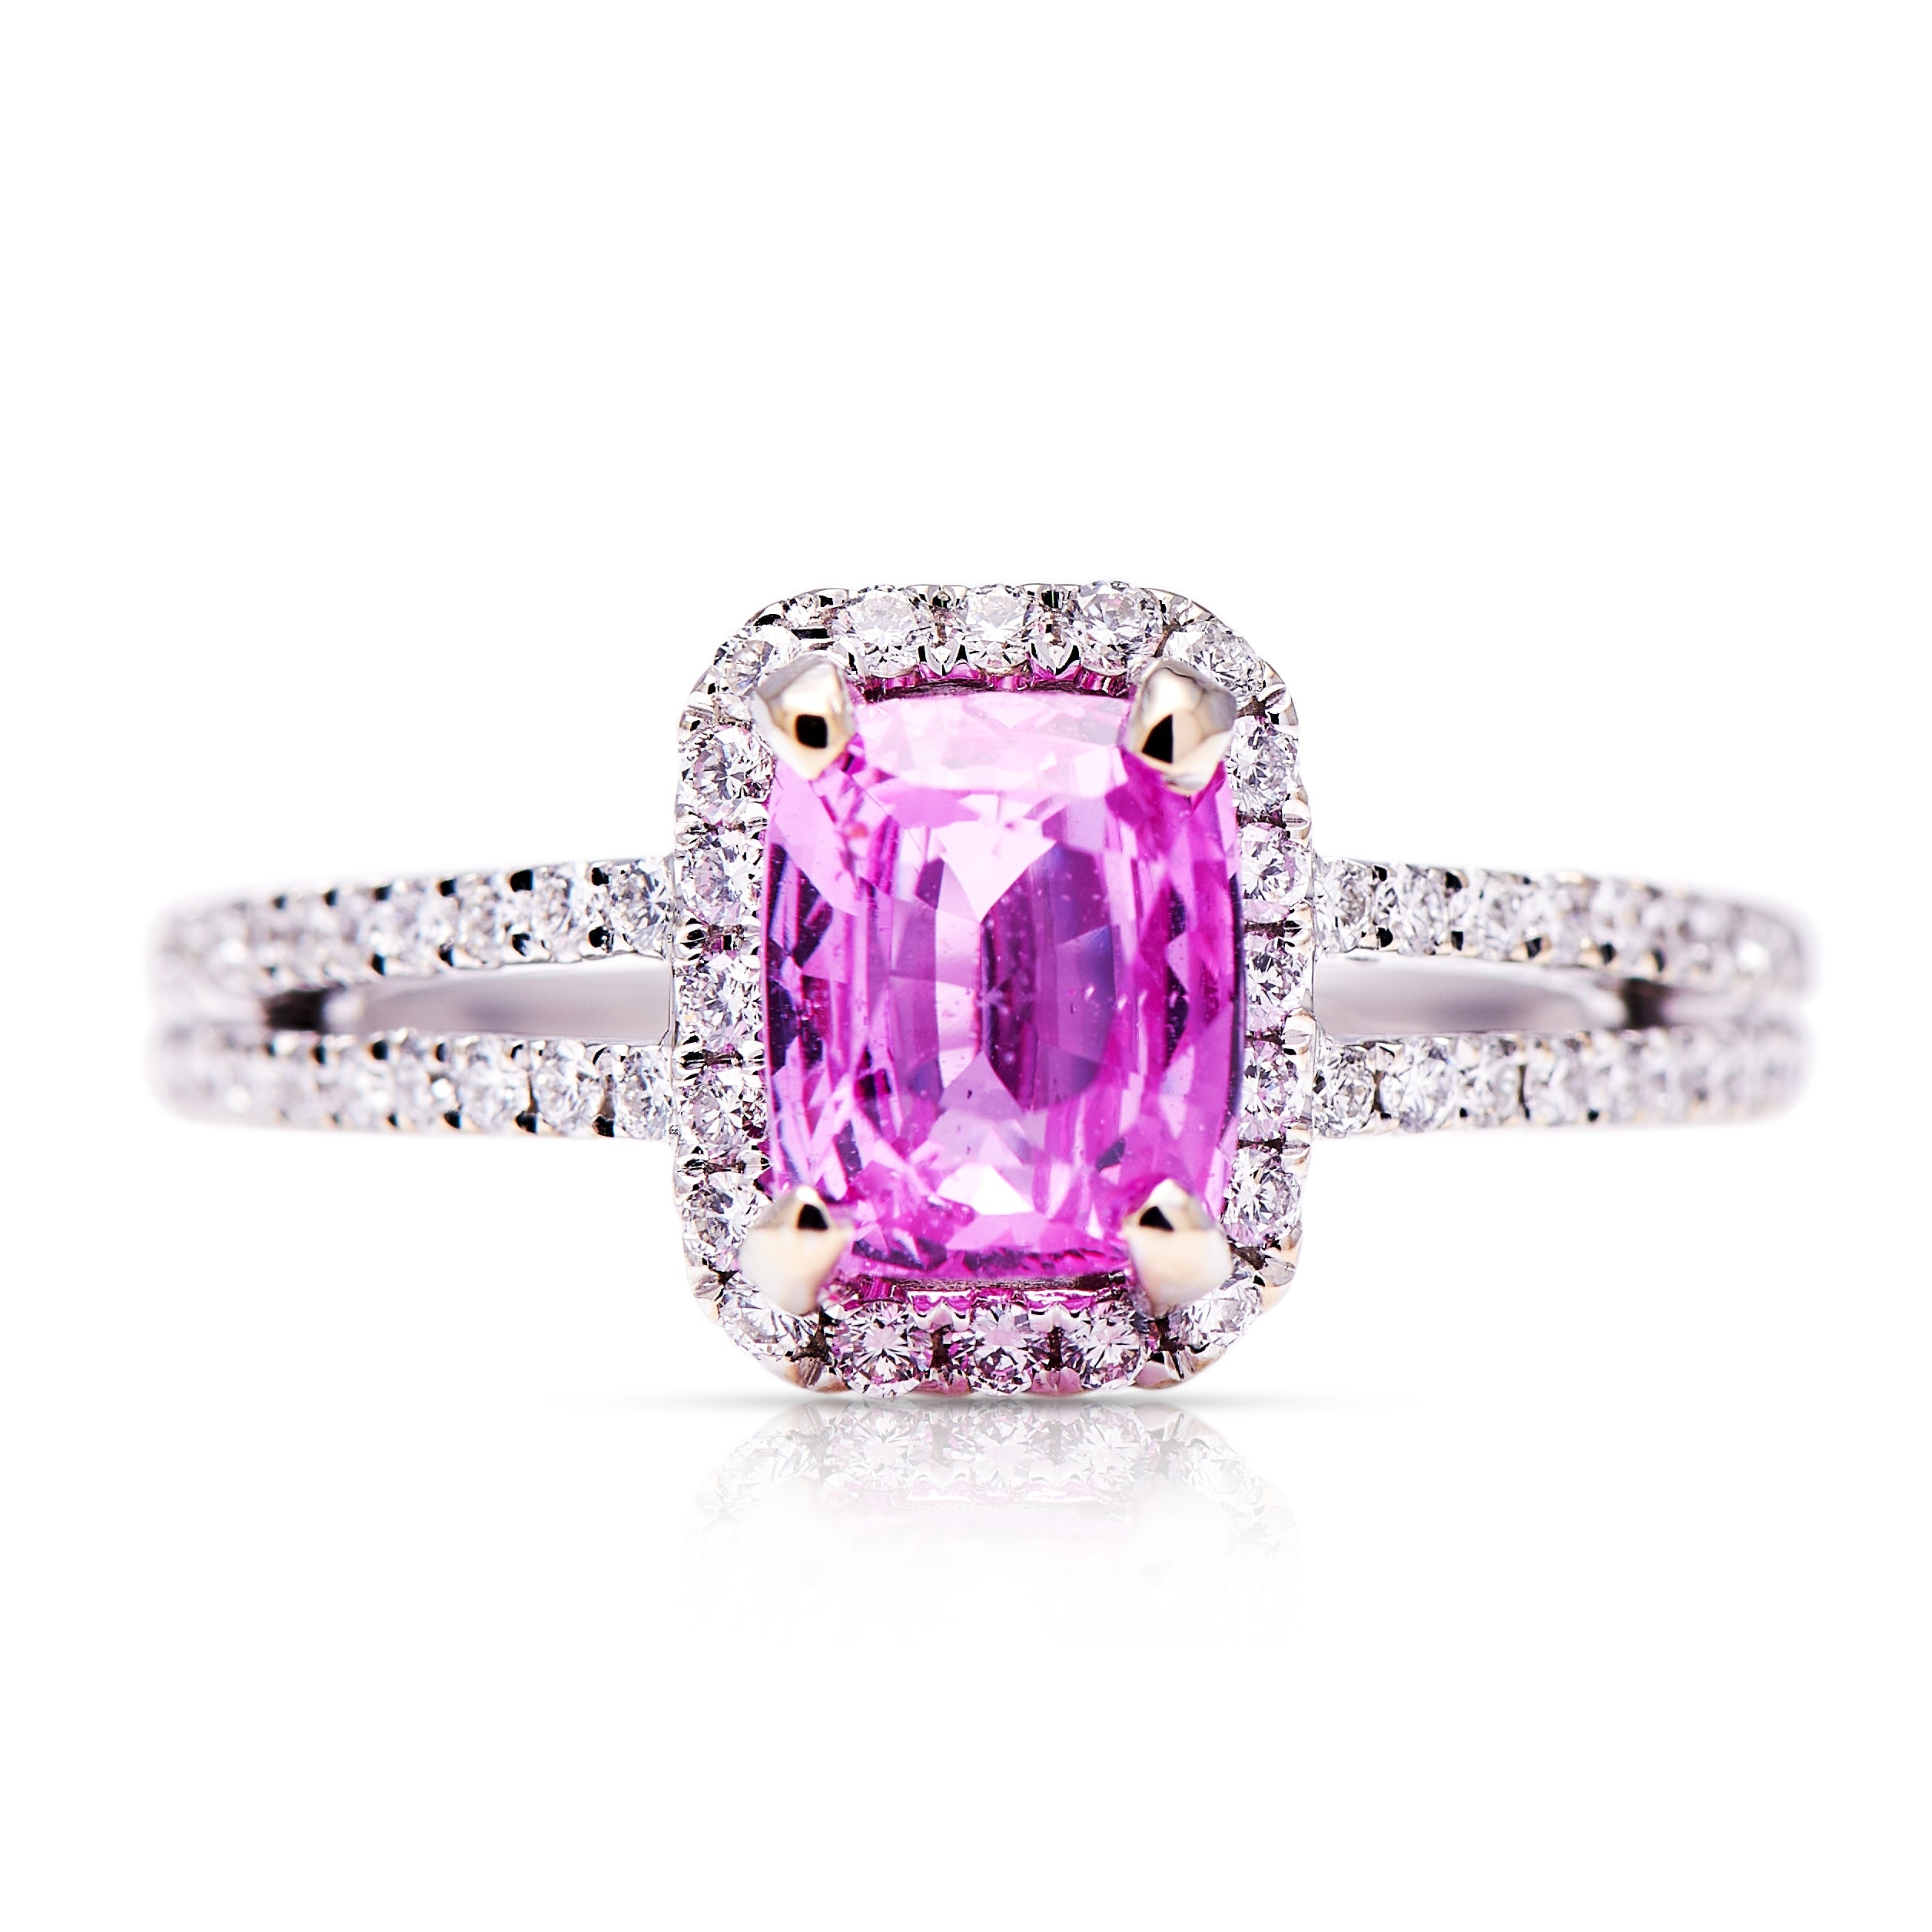 Engagement | 18ct White gold, Pink Sapphire and Diamond Ring – Vintage Ring – Antique Ring Boutique